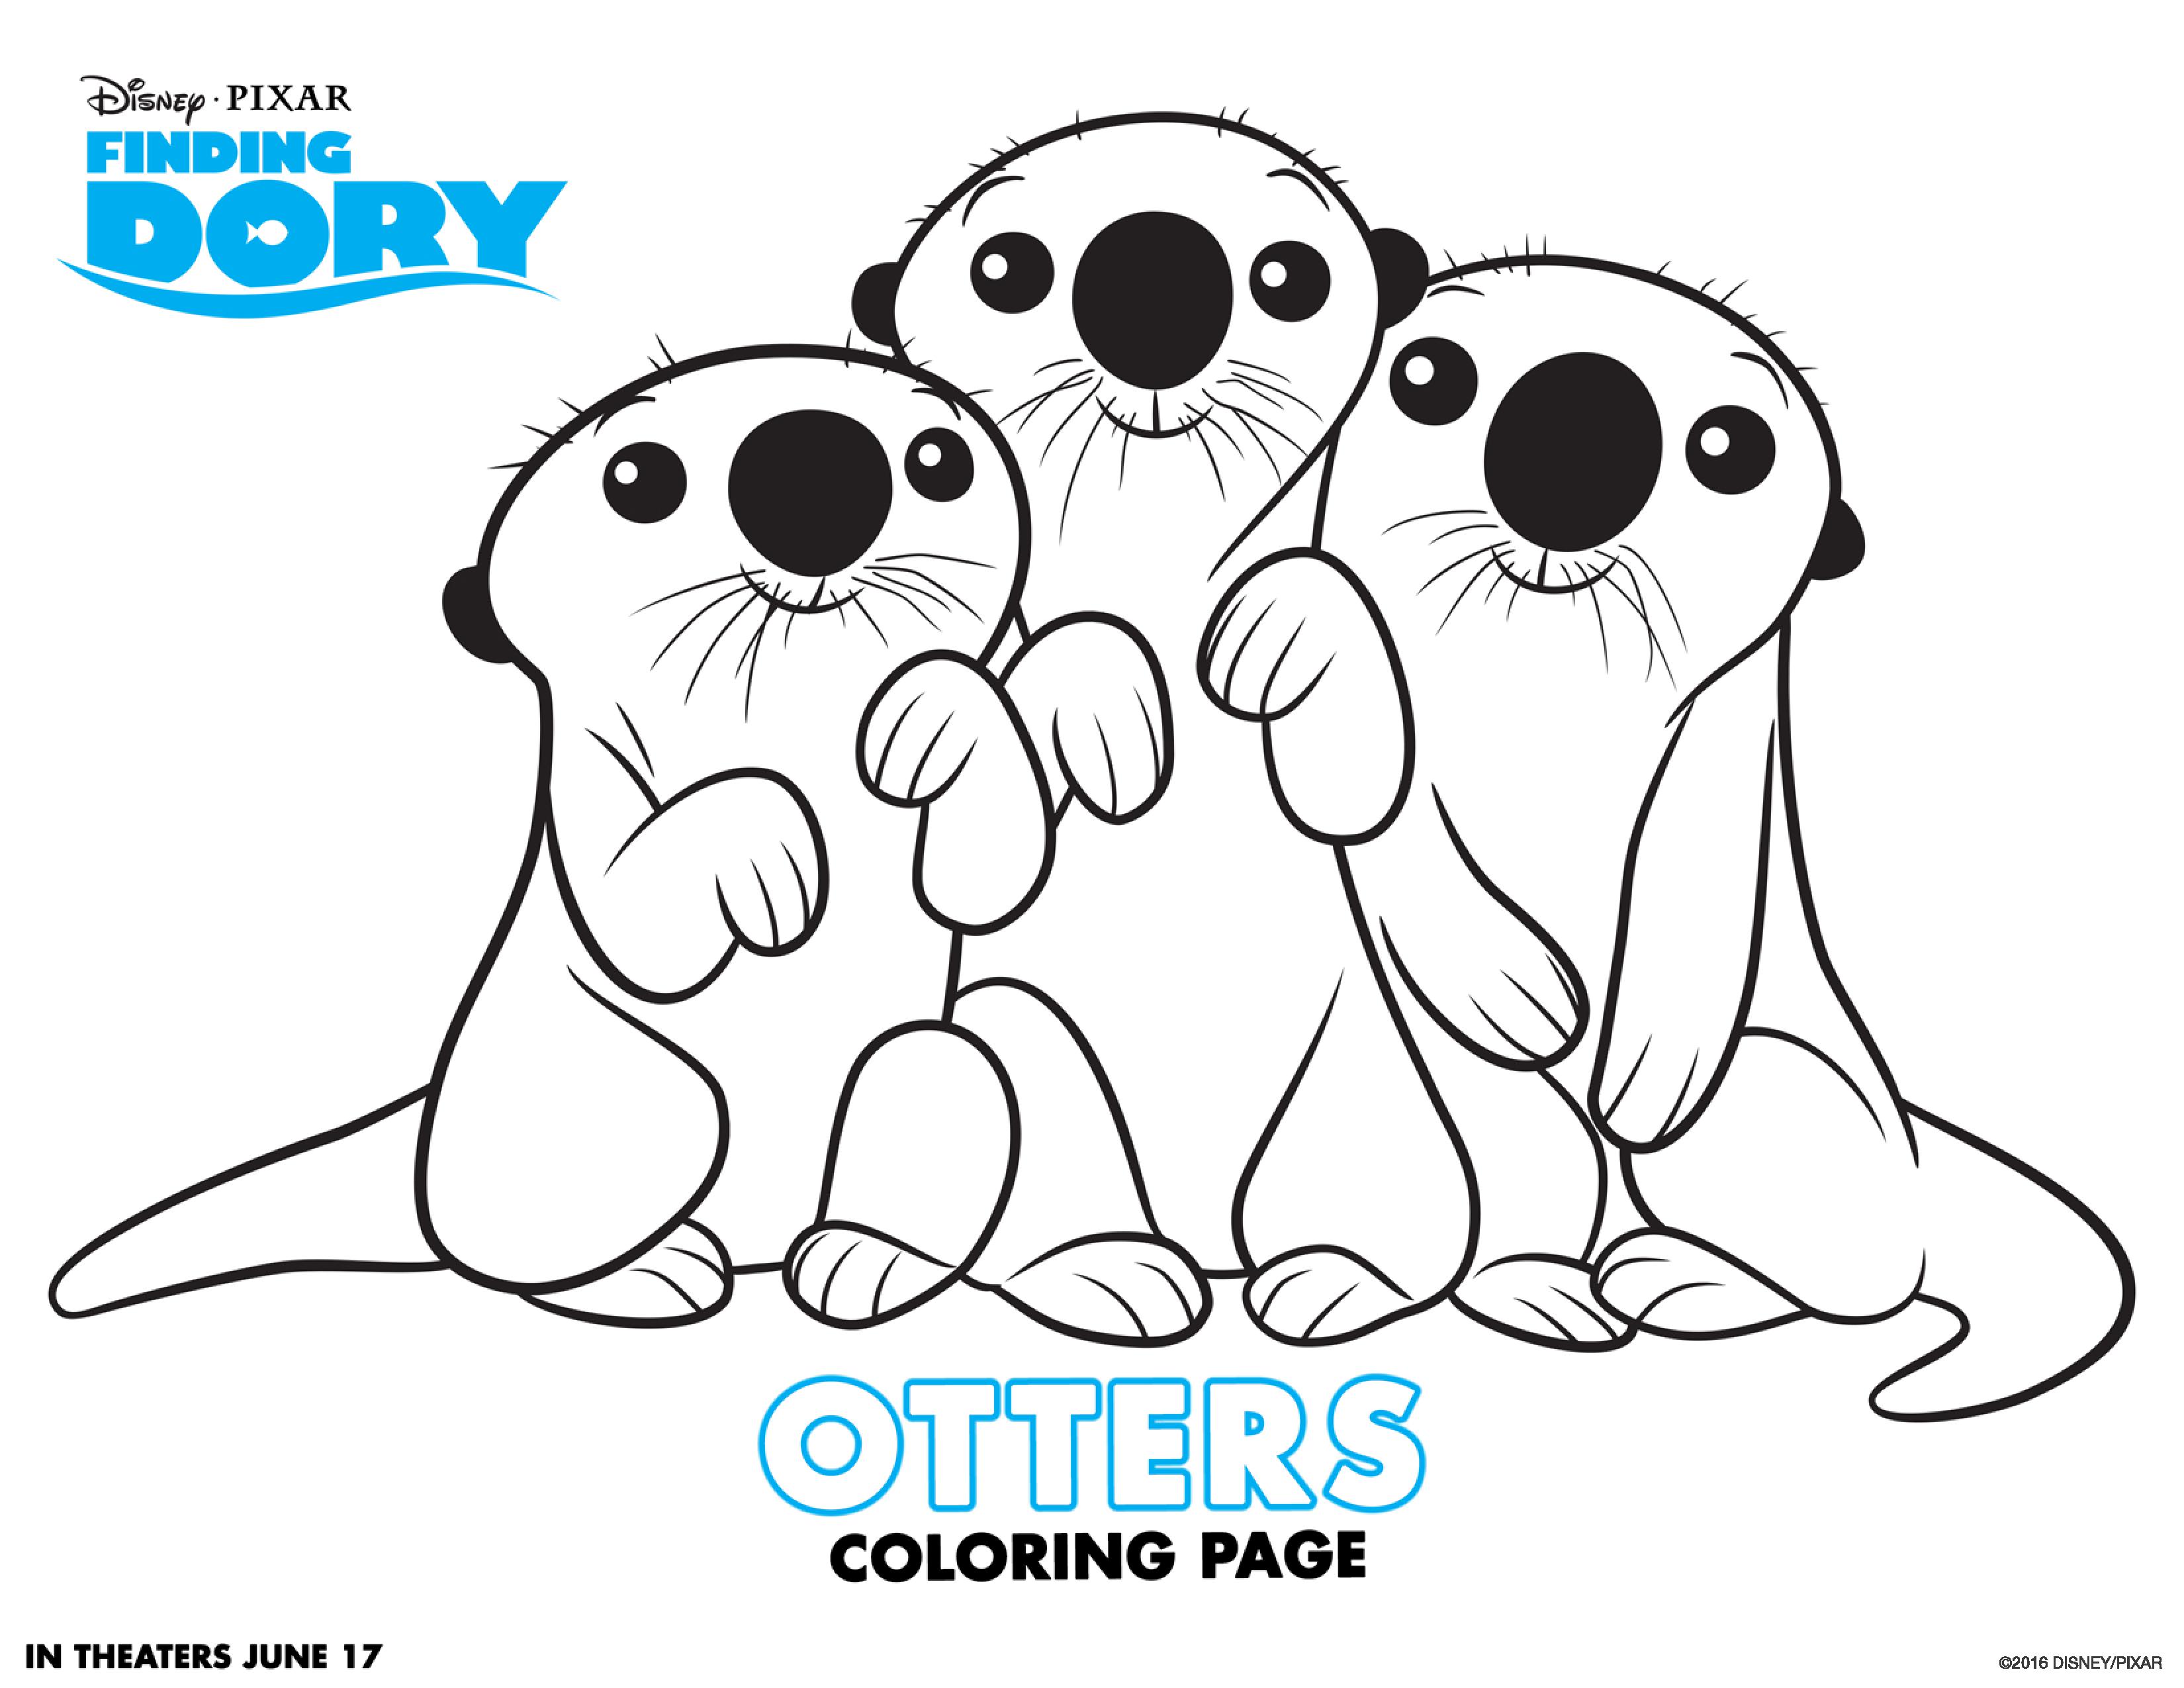 Dory Otters Coloring Page